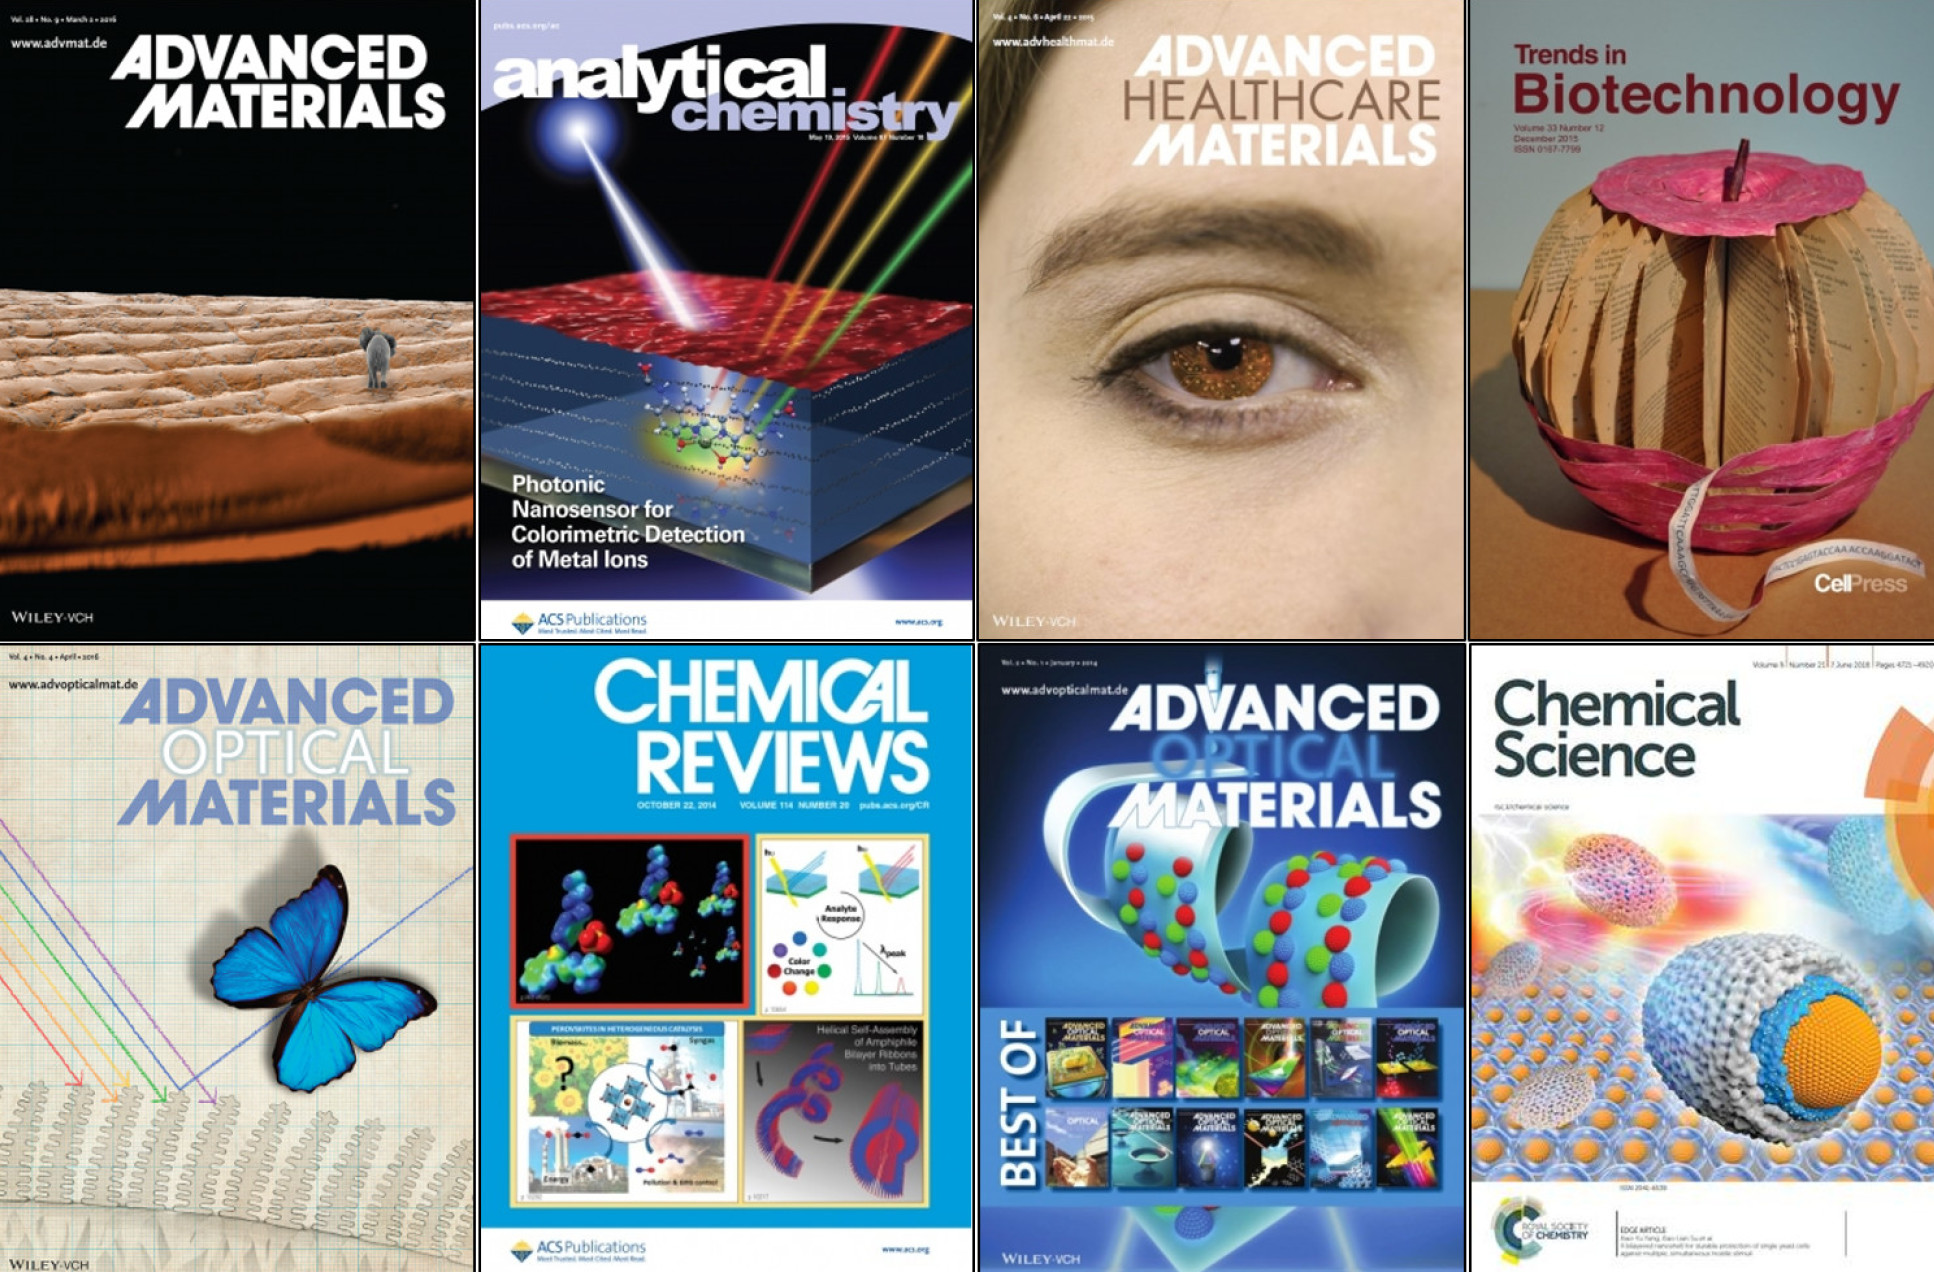 Journal Covers showing the highlights of the Yetisen laboratory